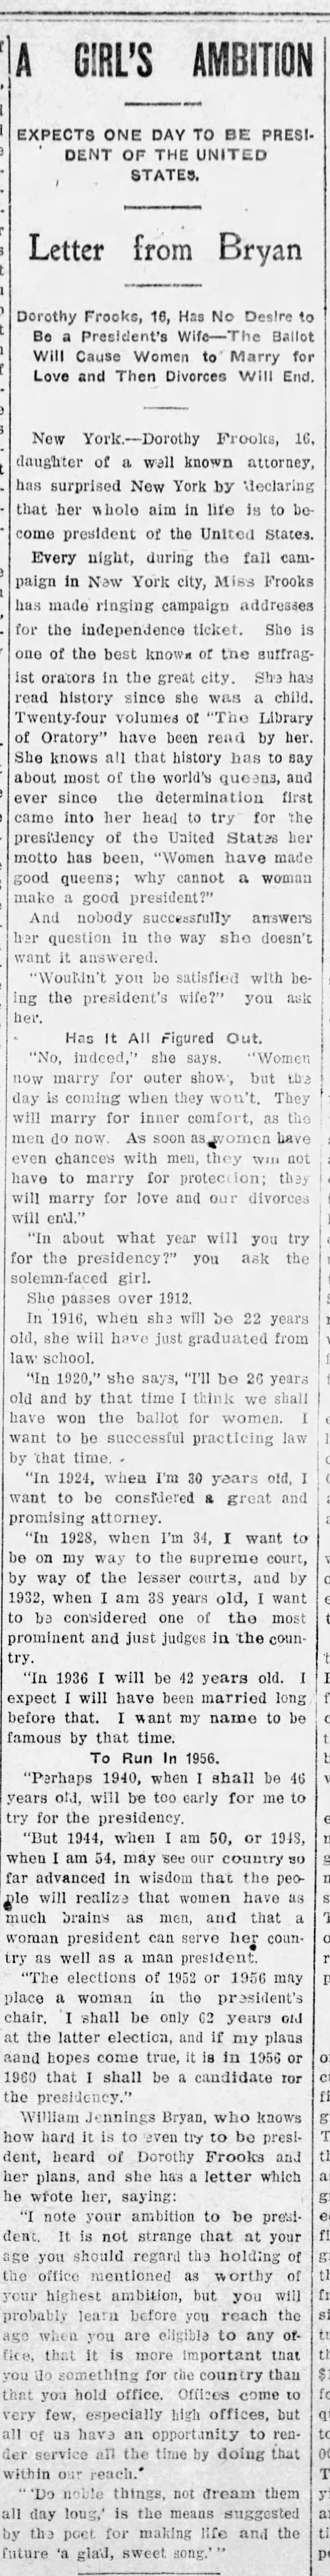 Dorothy Frooks wants to be president, 1910